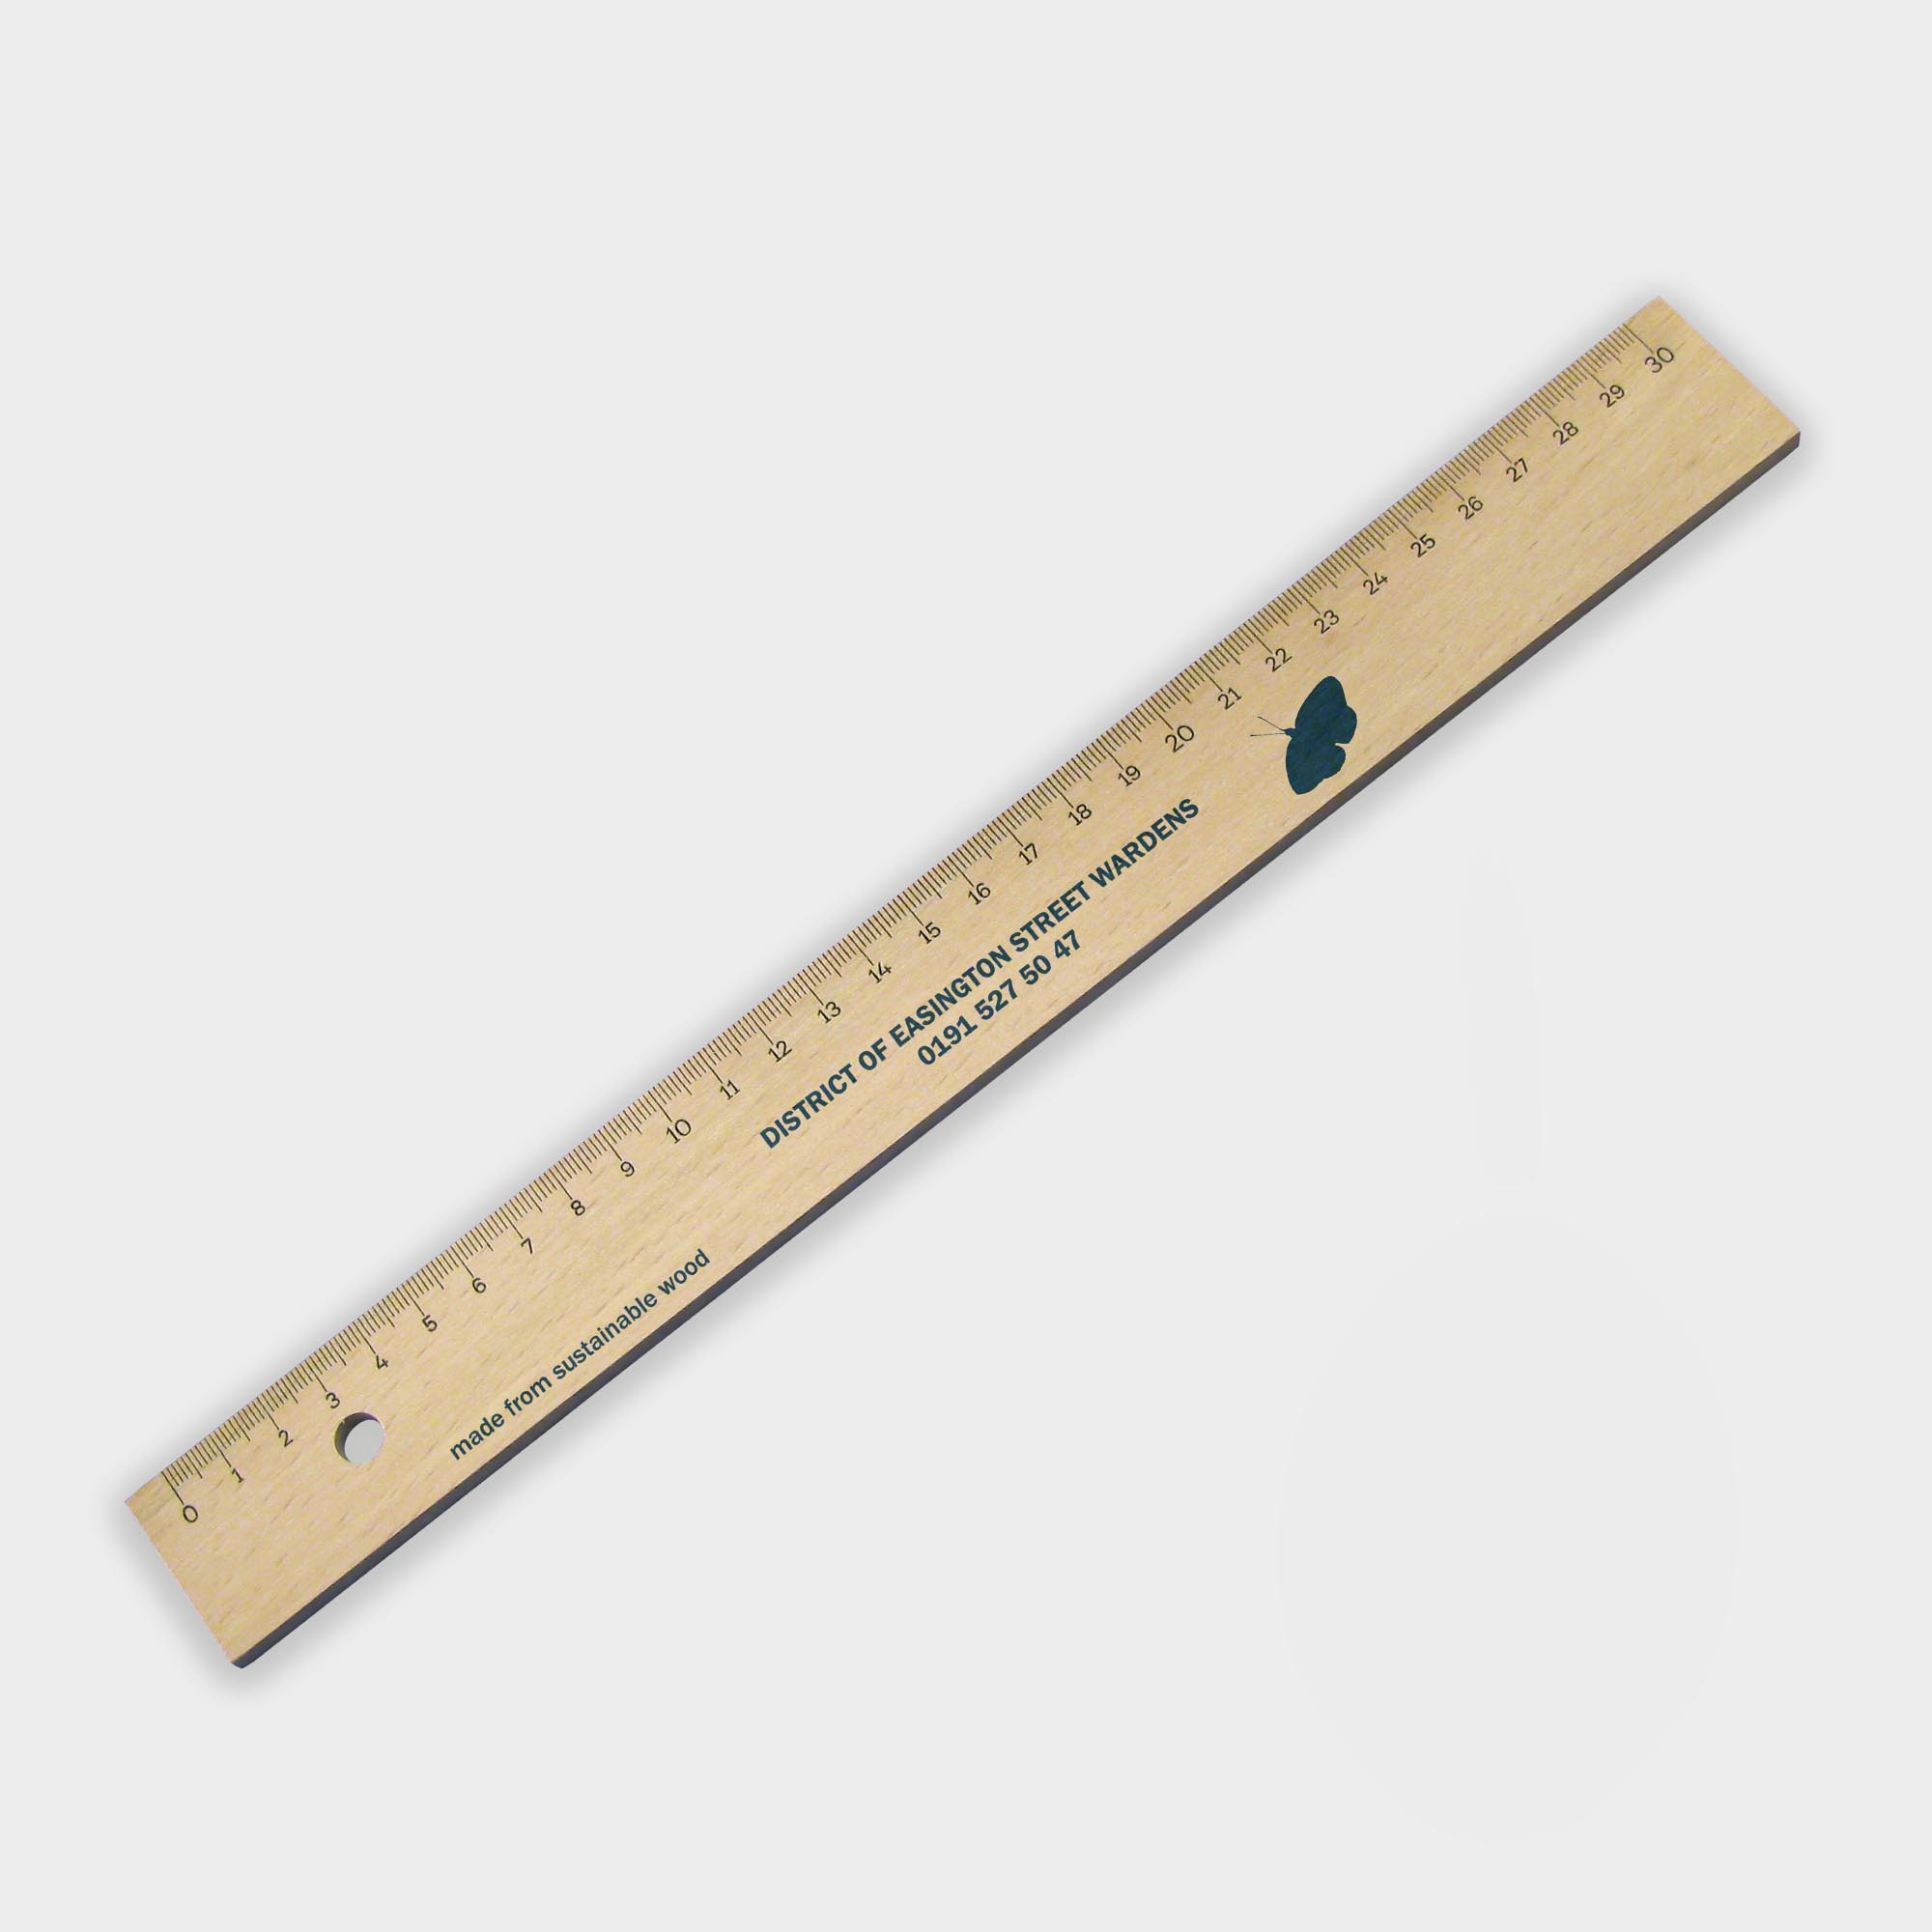 The Green & Good Sustainable Wooden Ruler is made from European sustainable timber. Comes as standard with 30cm graduations pre-printed in cm and with a metal insert.